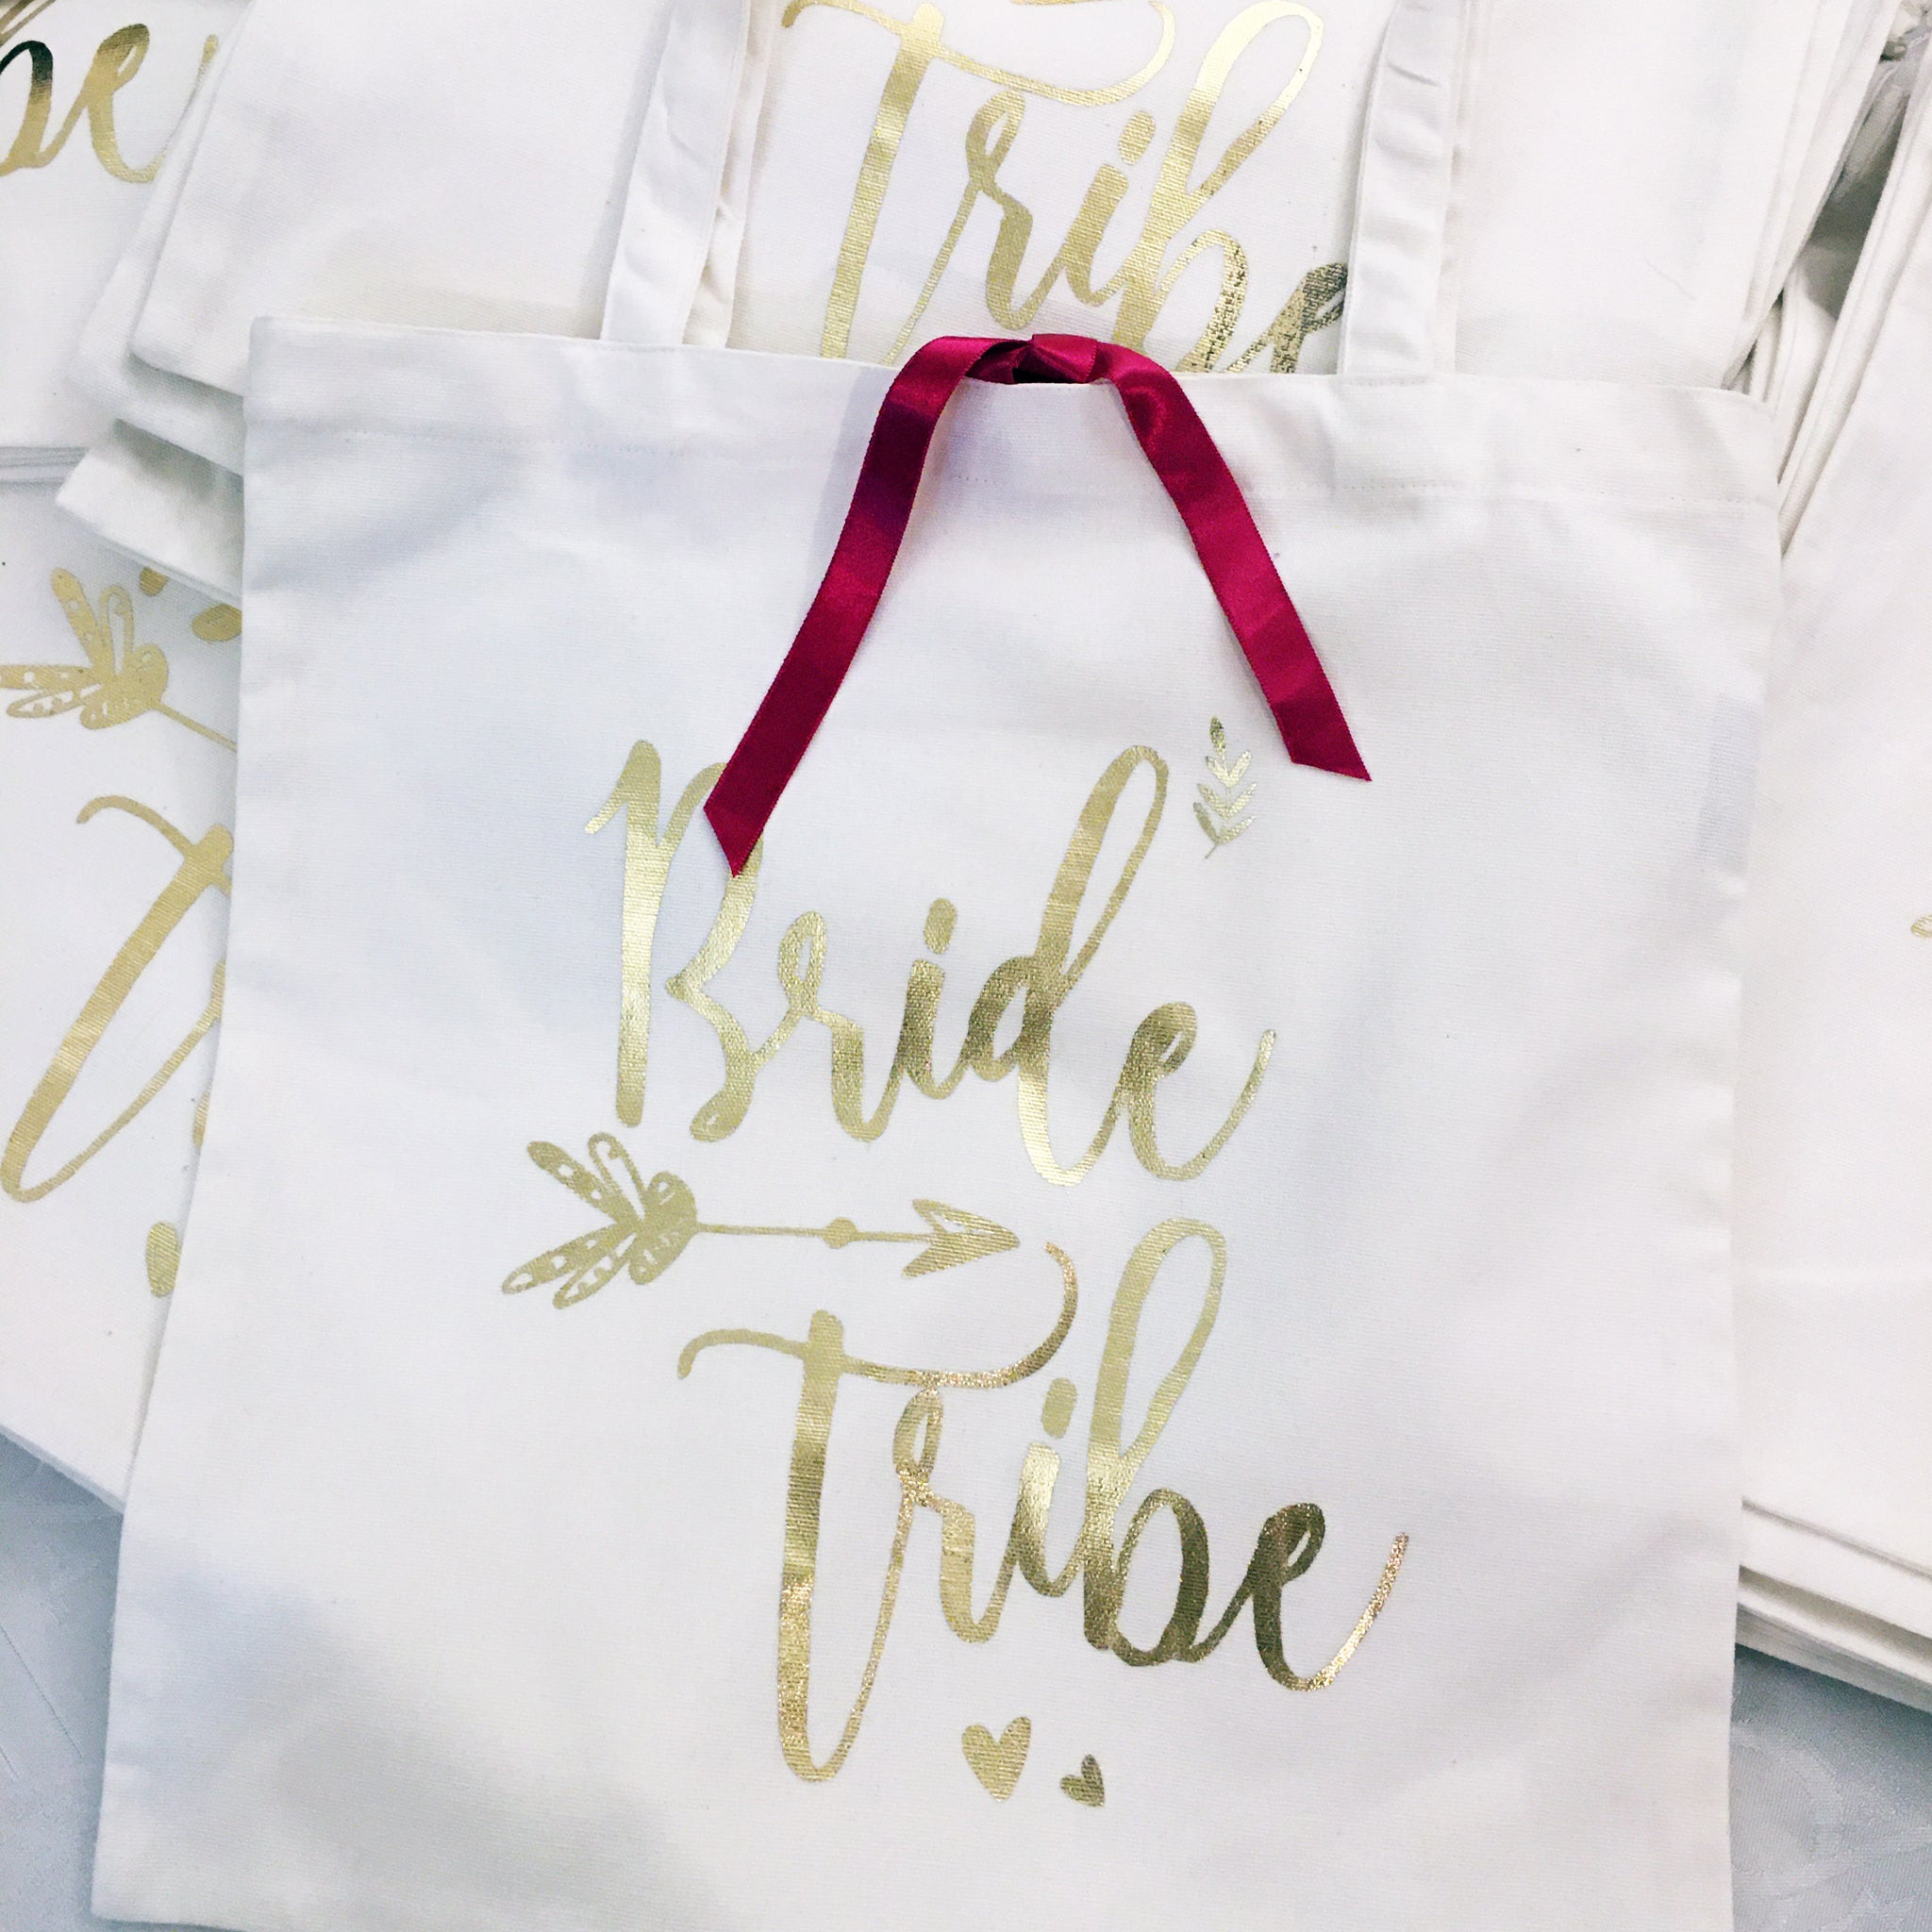 Bride Tribe Tote - The Style Salad